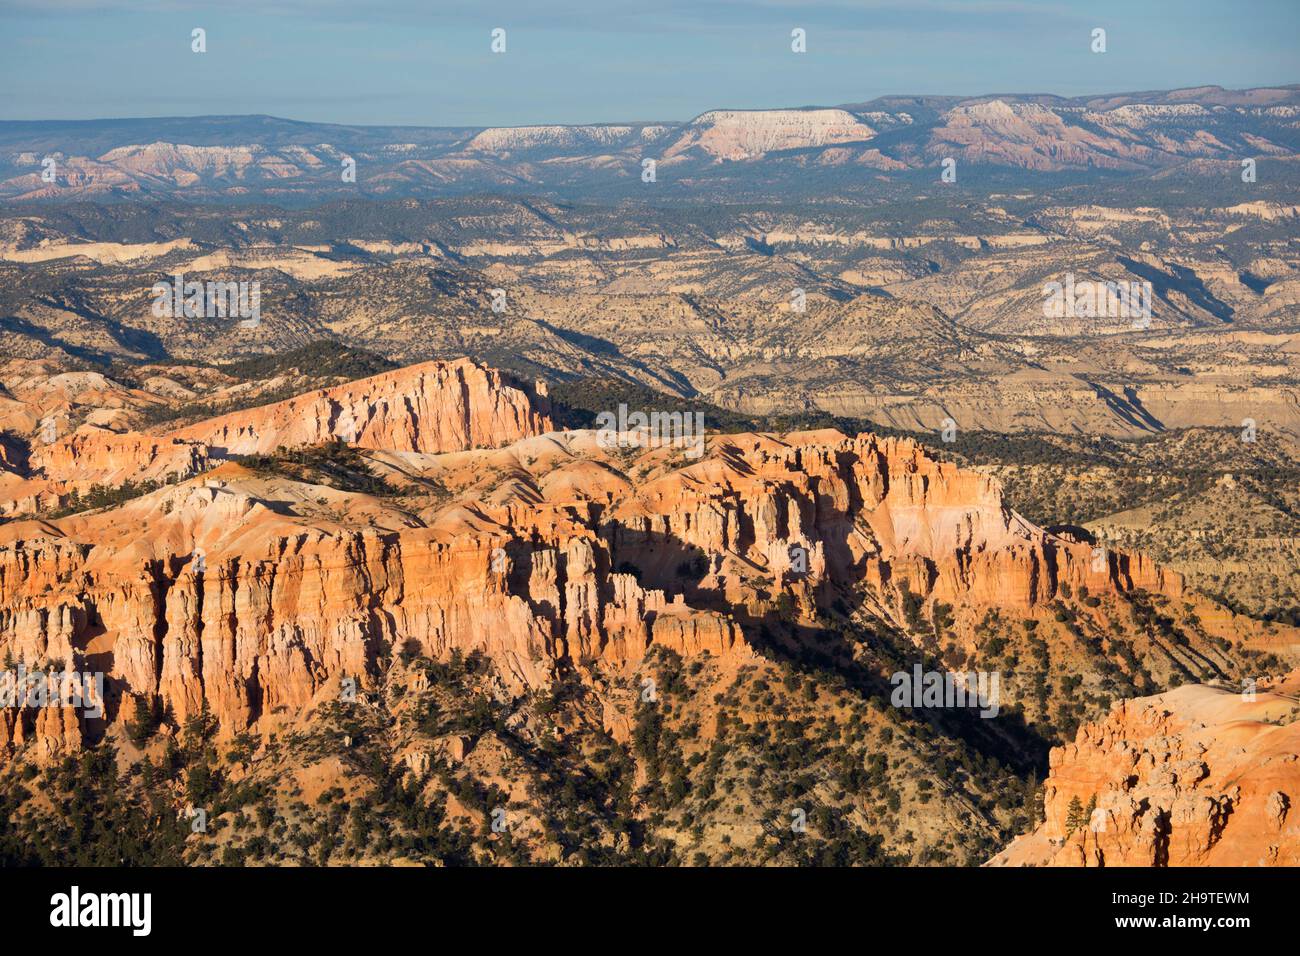 Bryce Canyon National Park, Utah, USA. View to Sinking Ship Mesa and distant Aquarius Plateau from the Rim Trail at Bryce Point, sunset. Stock Photo